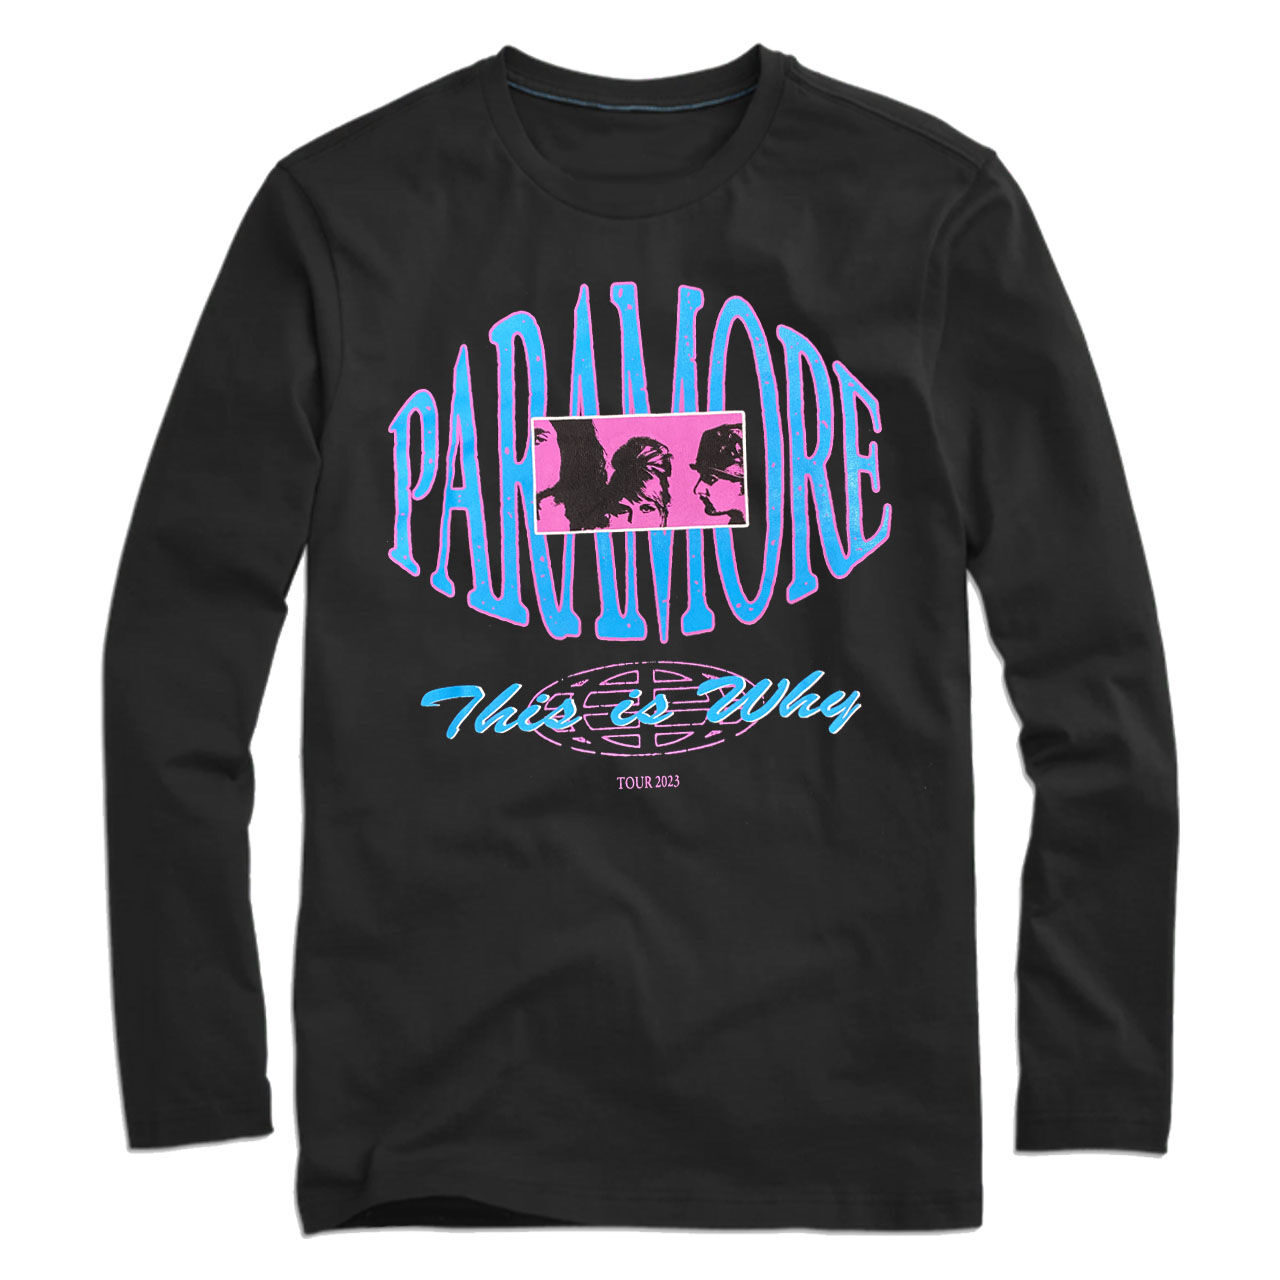 PARAMORE This Is Why Tour Longsleeve Black Tshirt